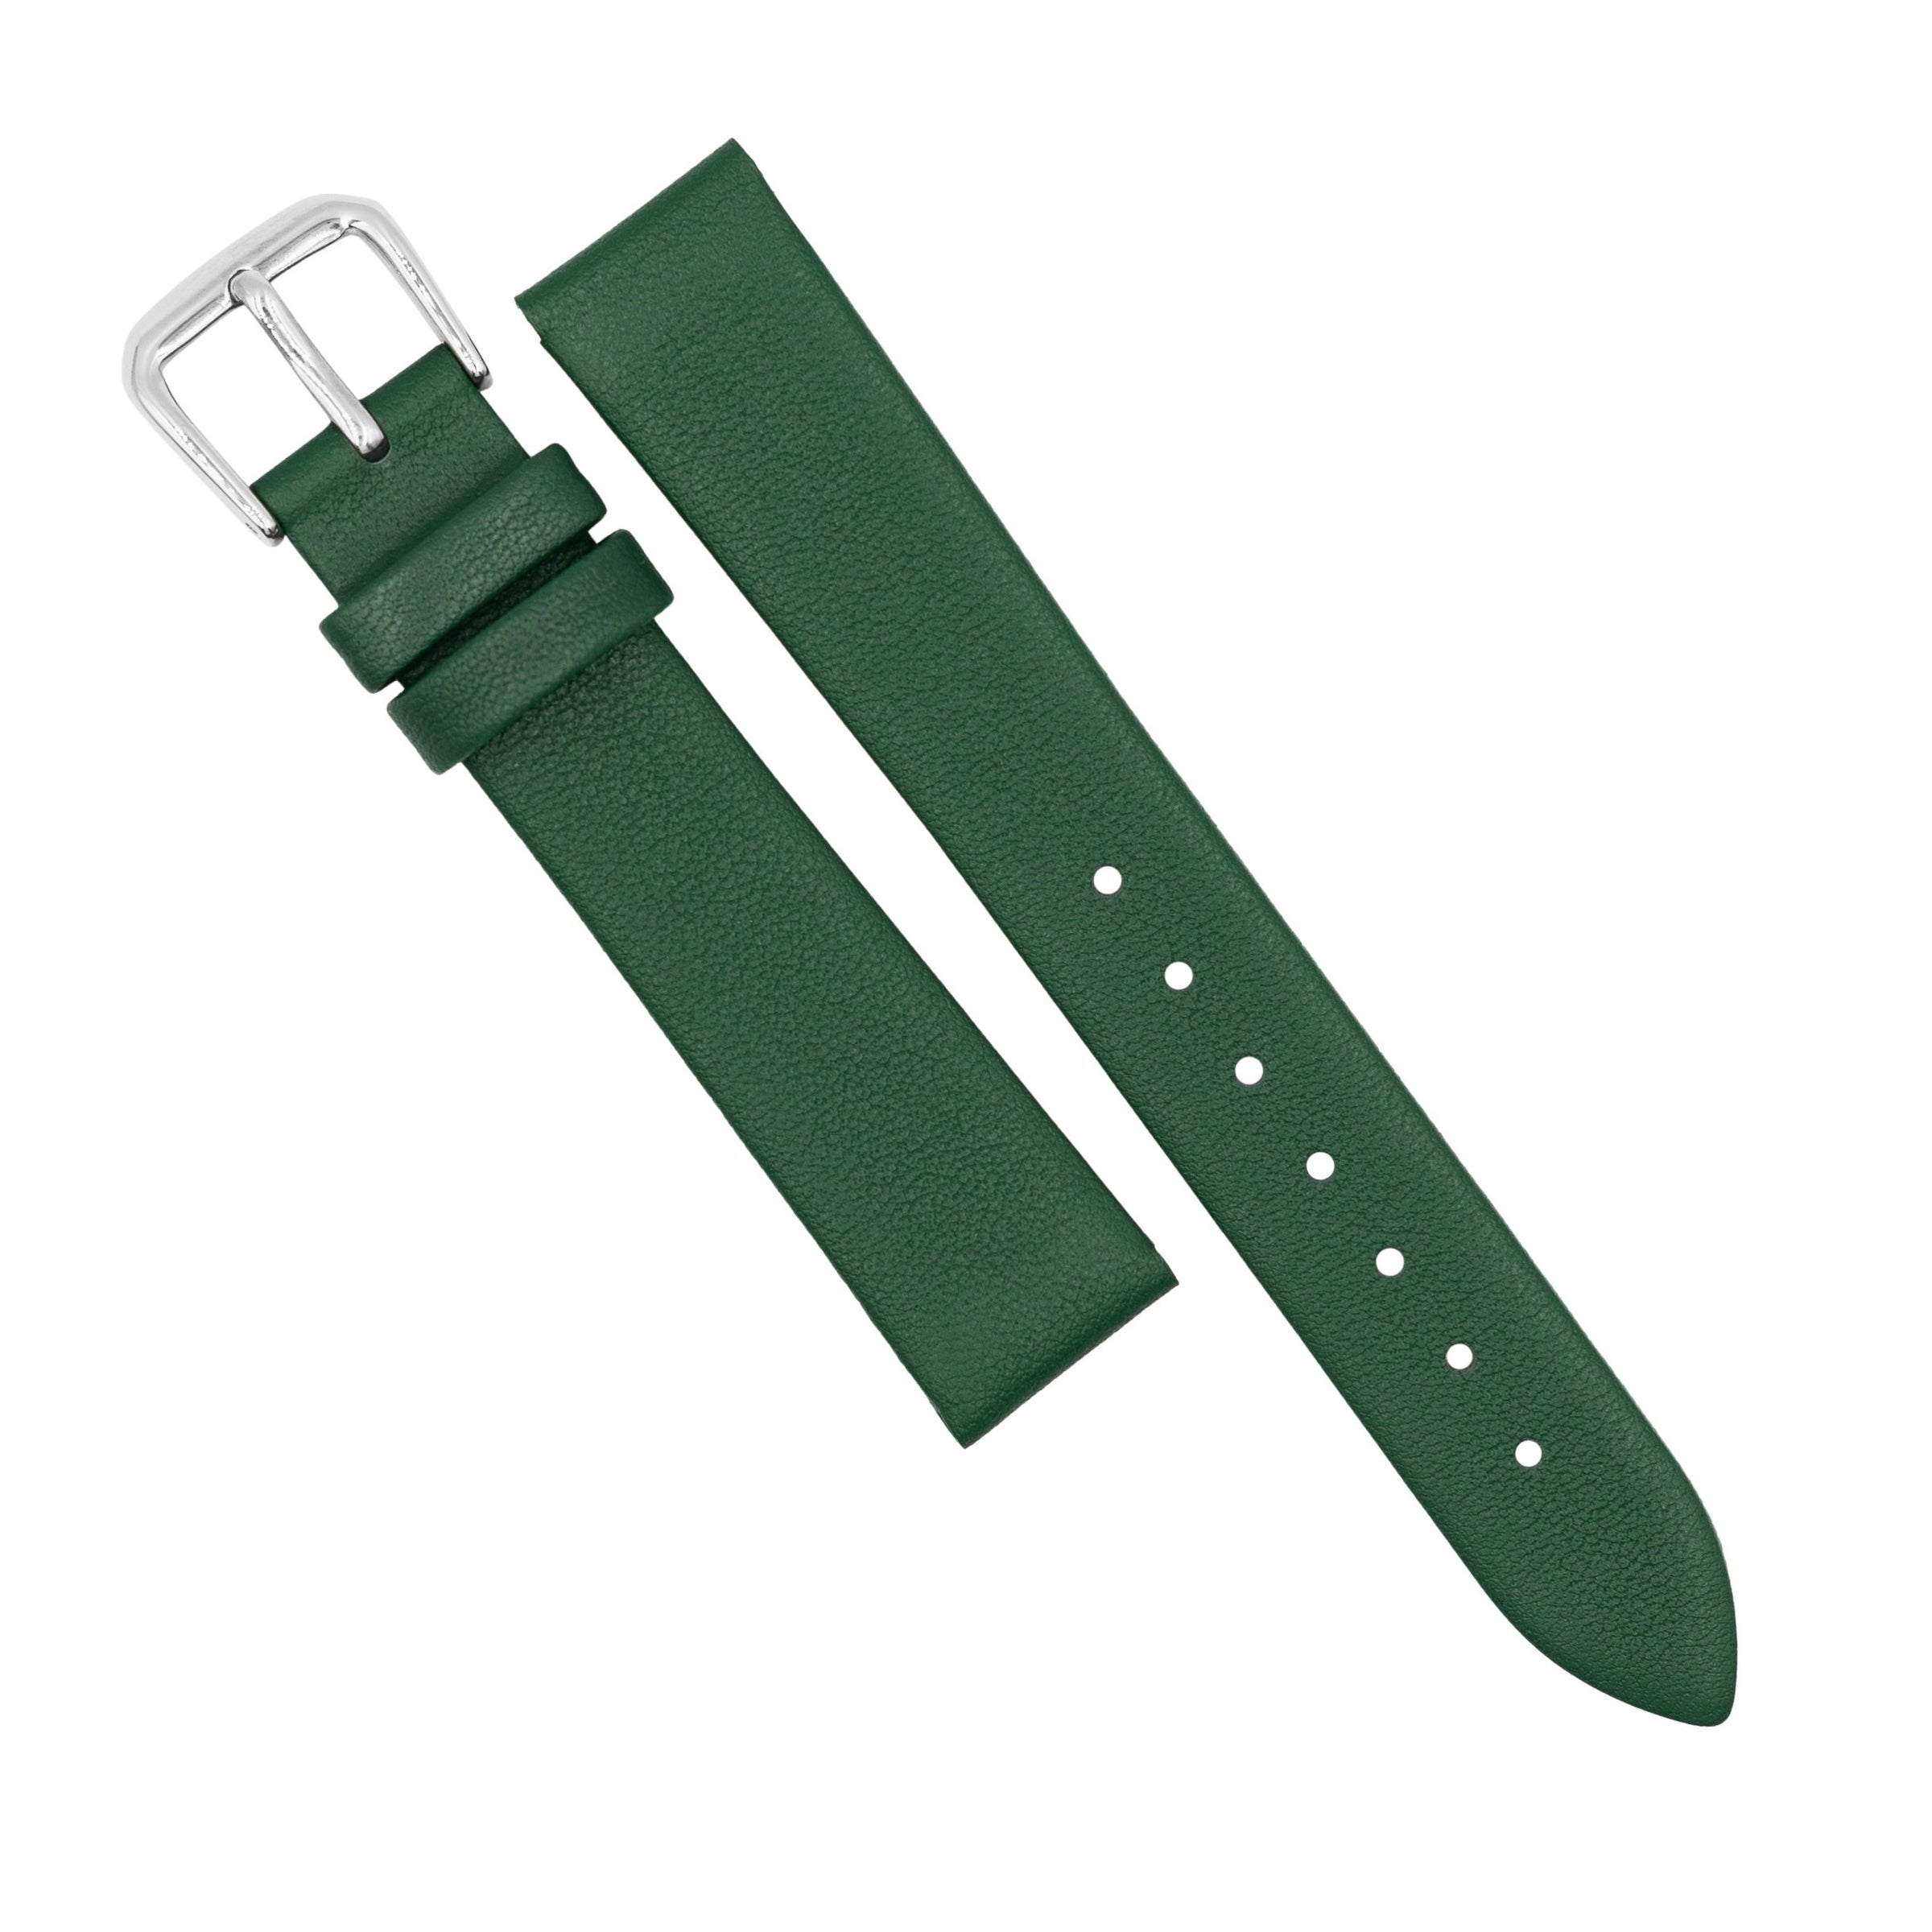 Unstitched Smooth Leather Watch Strap in Green (12mm) - Nomad Watch Works MY